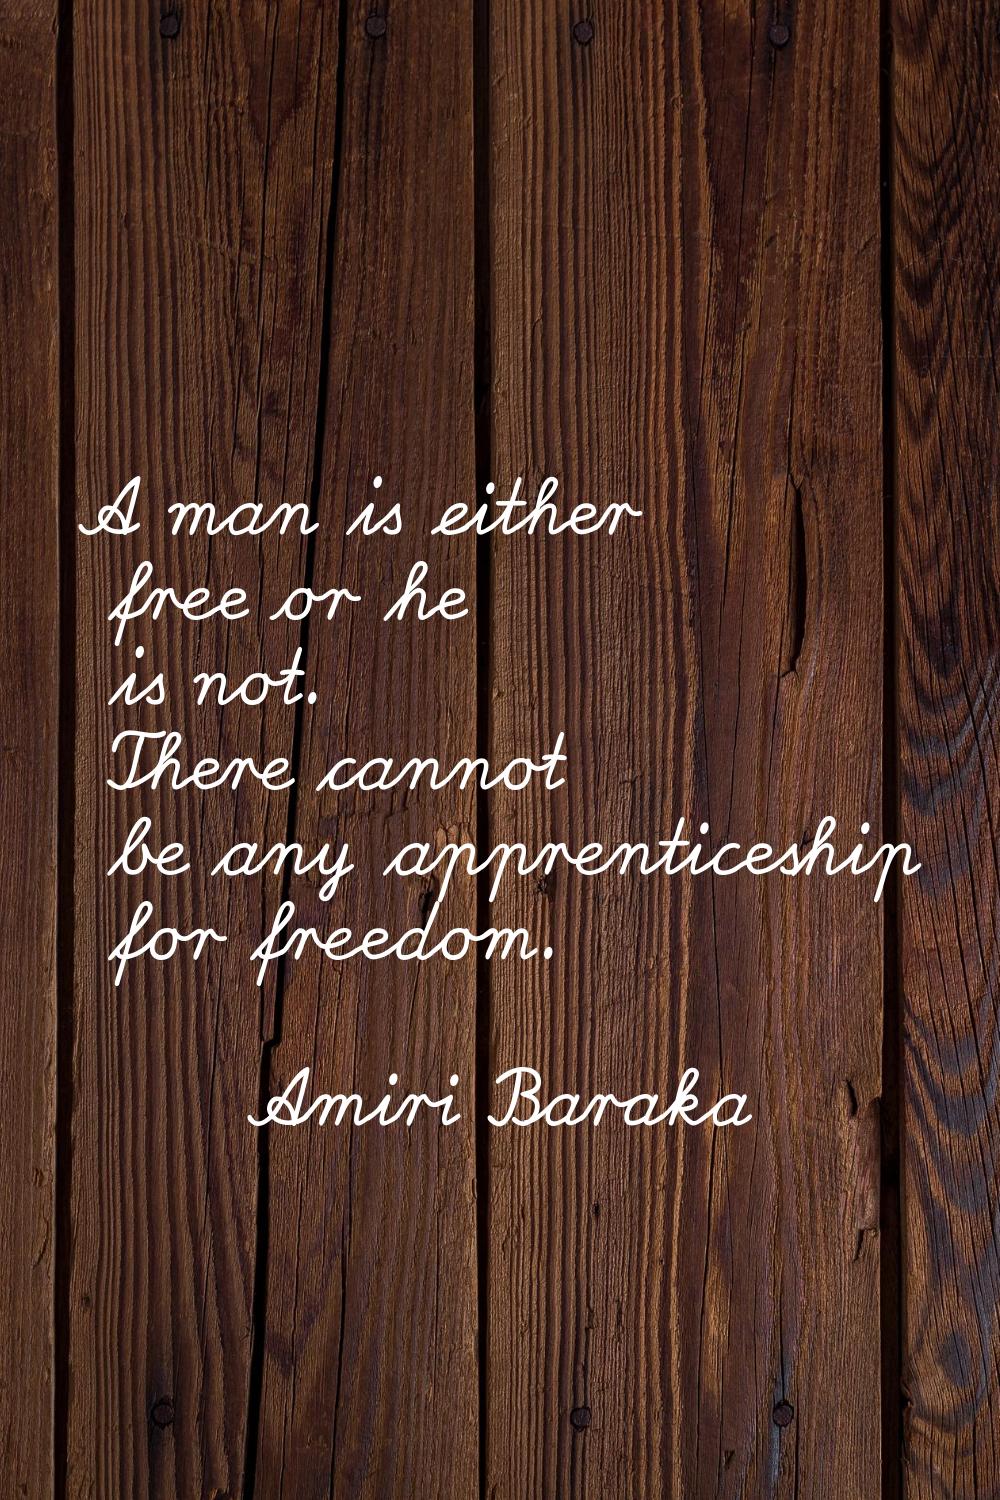 A man is either free or he is not. There cannot be any apprenticeship for freedom.